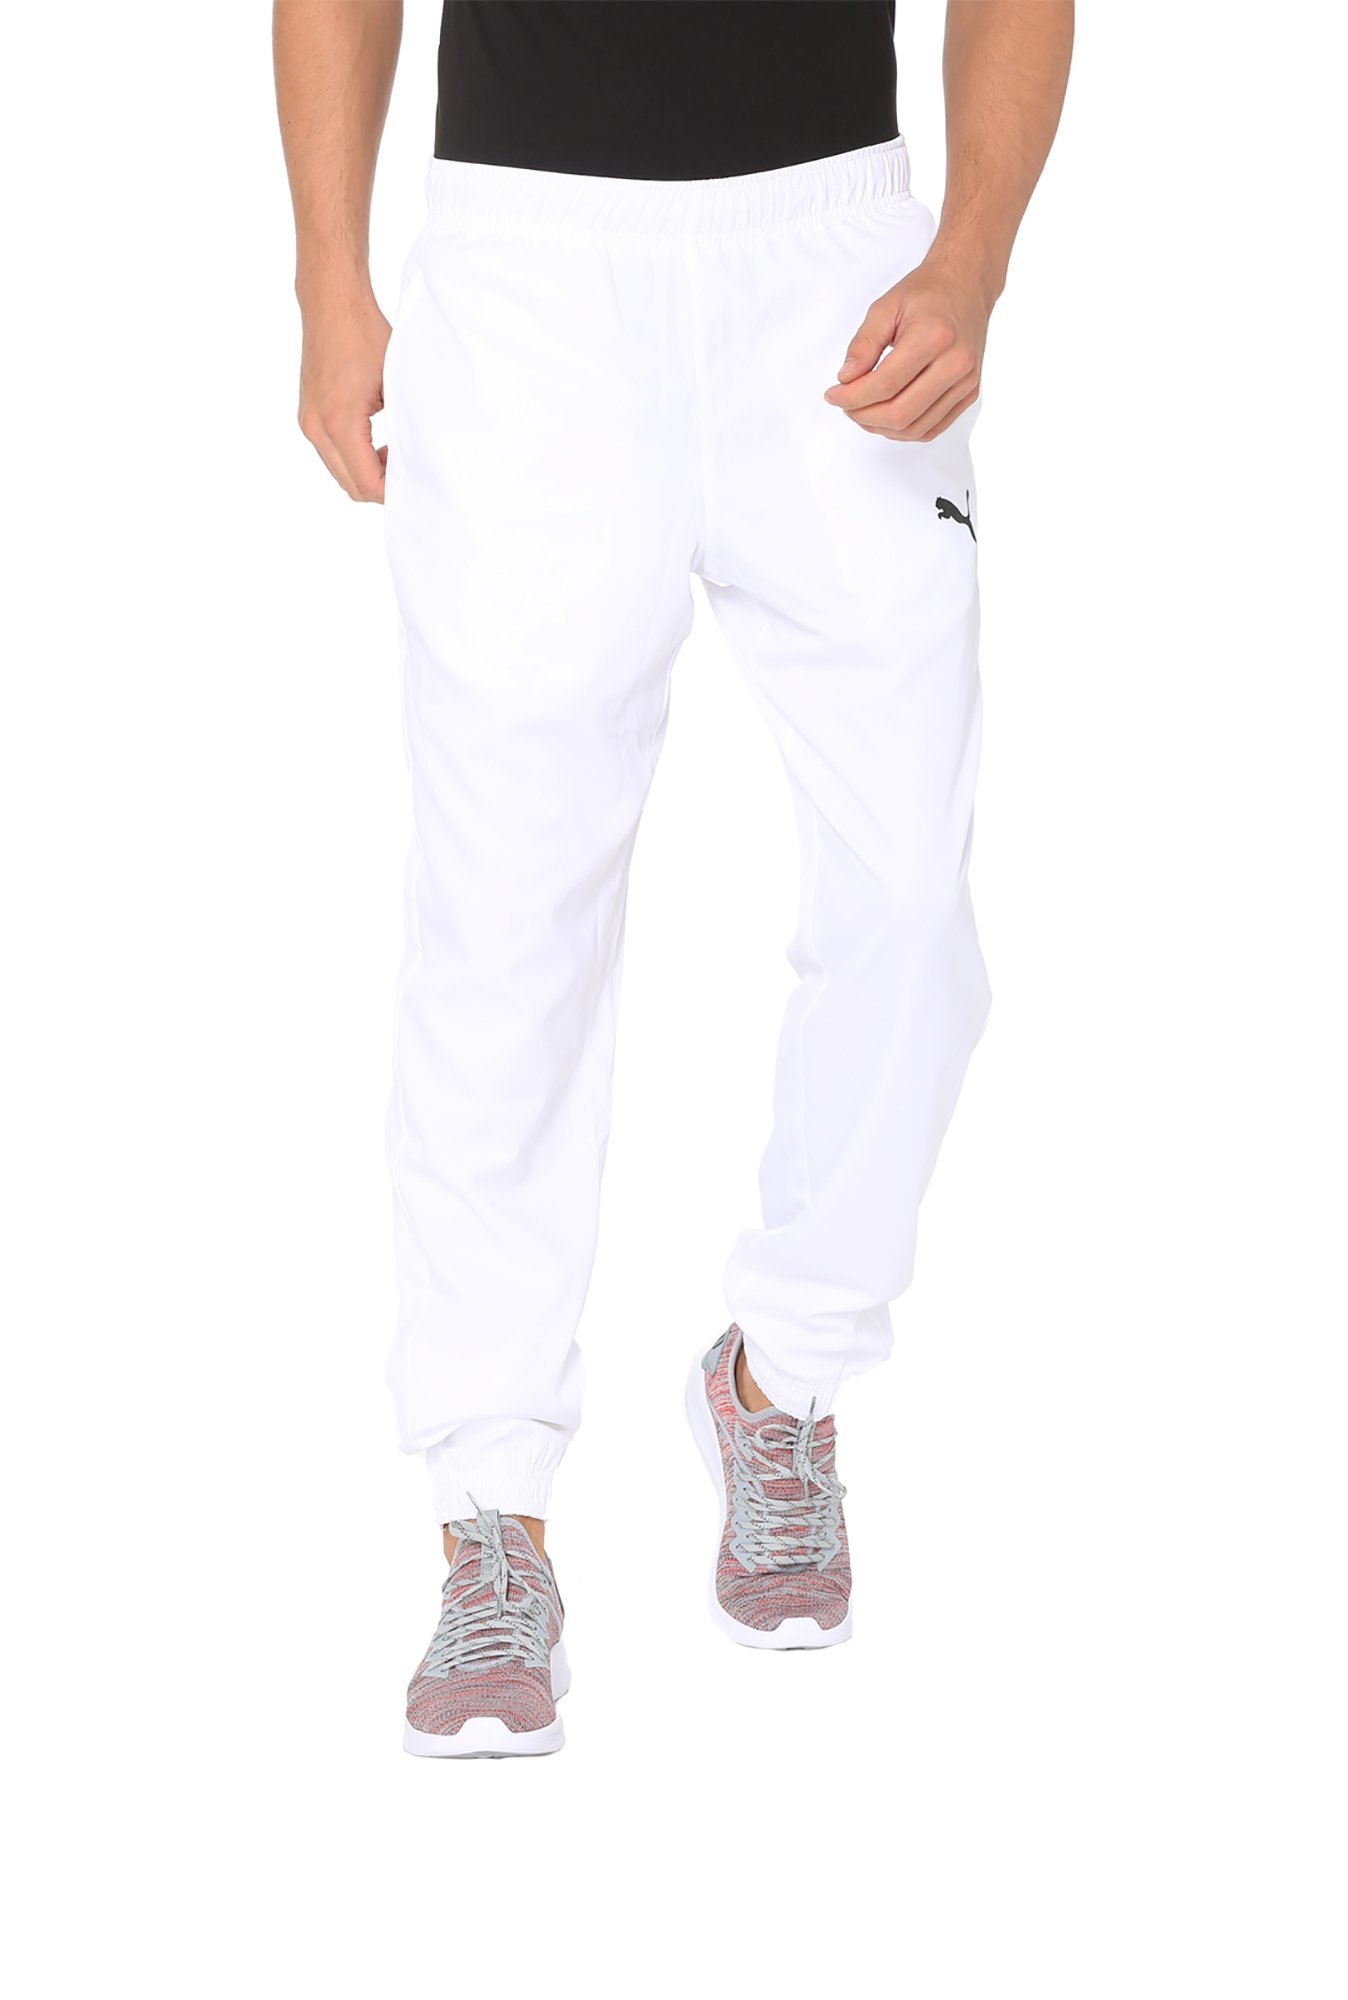 Buy Puma Women White PWR SWAGGER Track Pants - Track Pants for Women  2252903 | Myntra